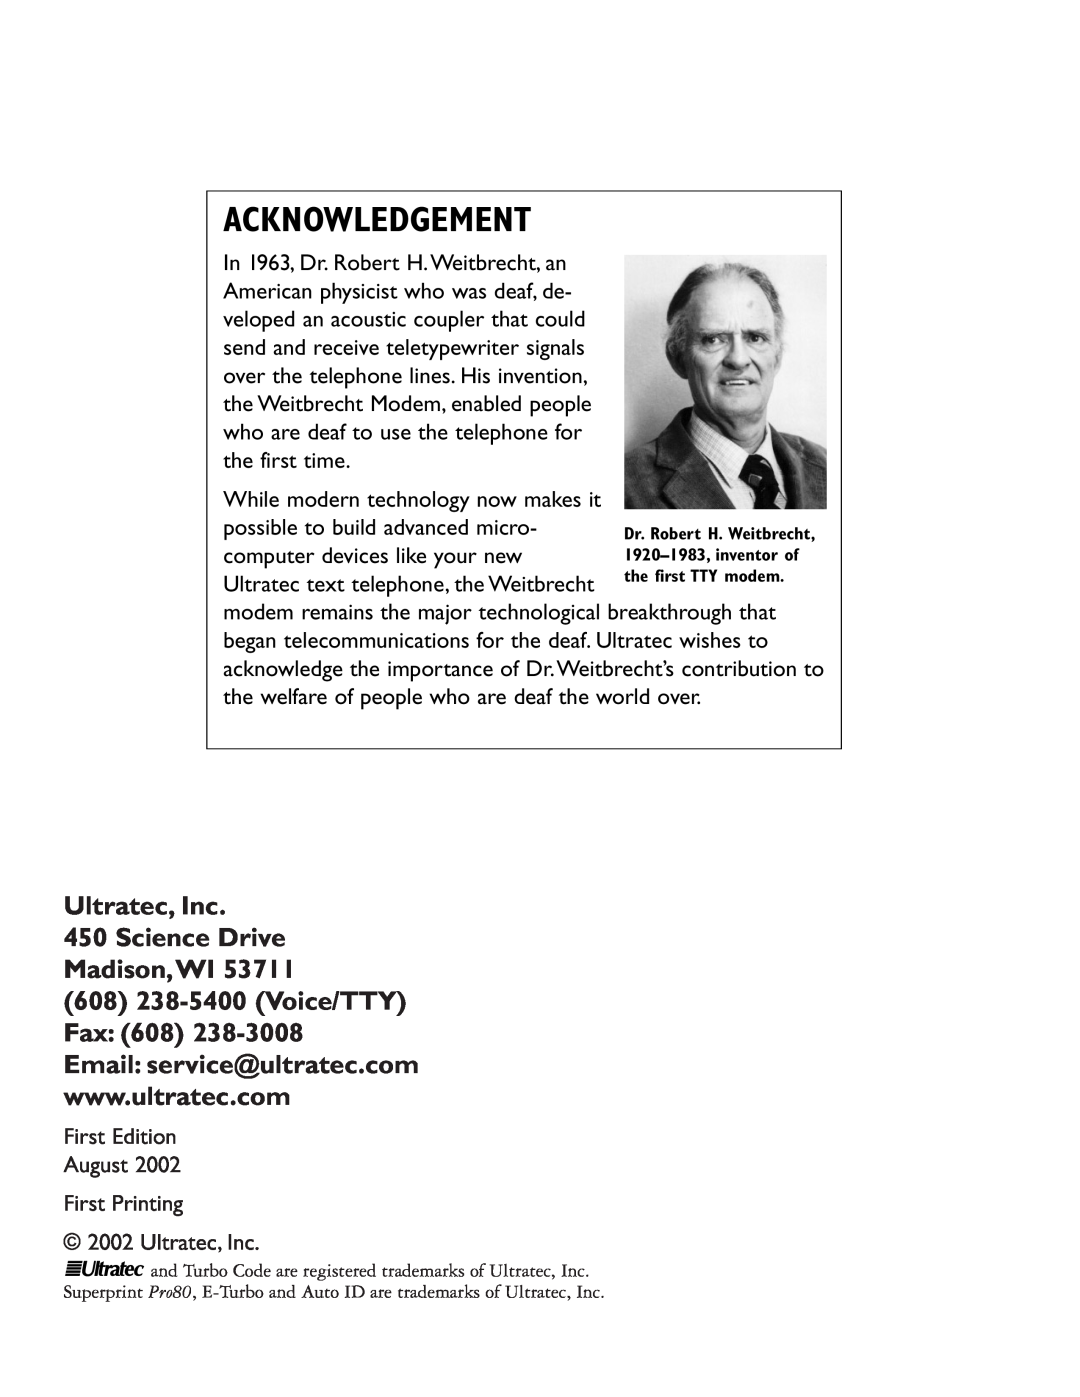 Ultratec PRO80TM manual Acknowledgement, Ultratec, Inc 450 Science Drive Madison,WI, 608 238-5400 Voice/TTY Fax 608 